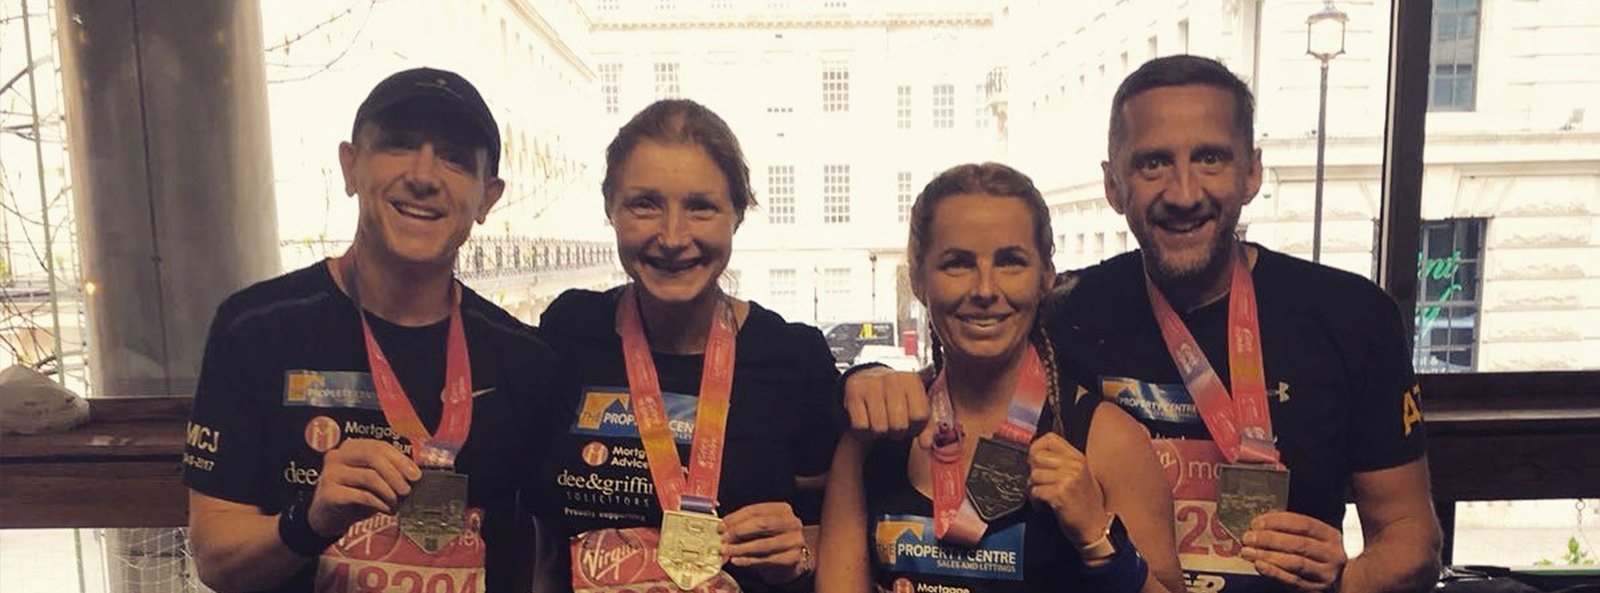 Steve Jones (Partner), Wendy Worger (Marketing Manager), Victoria Anderson (Social Media Executive) and Simon Trippett (Director) at The Property Centre with their winners medals after completing the London Marathon for charity.